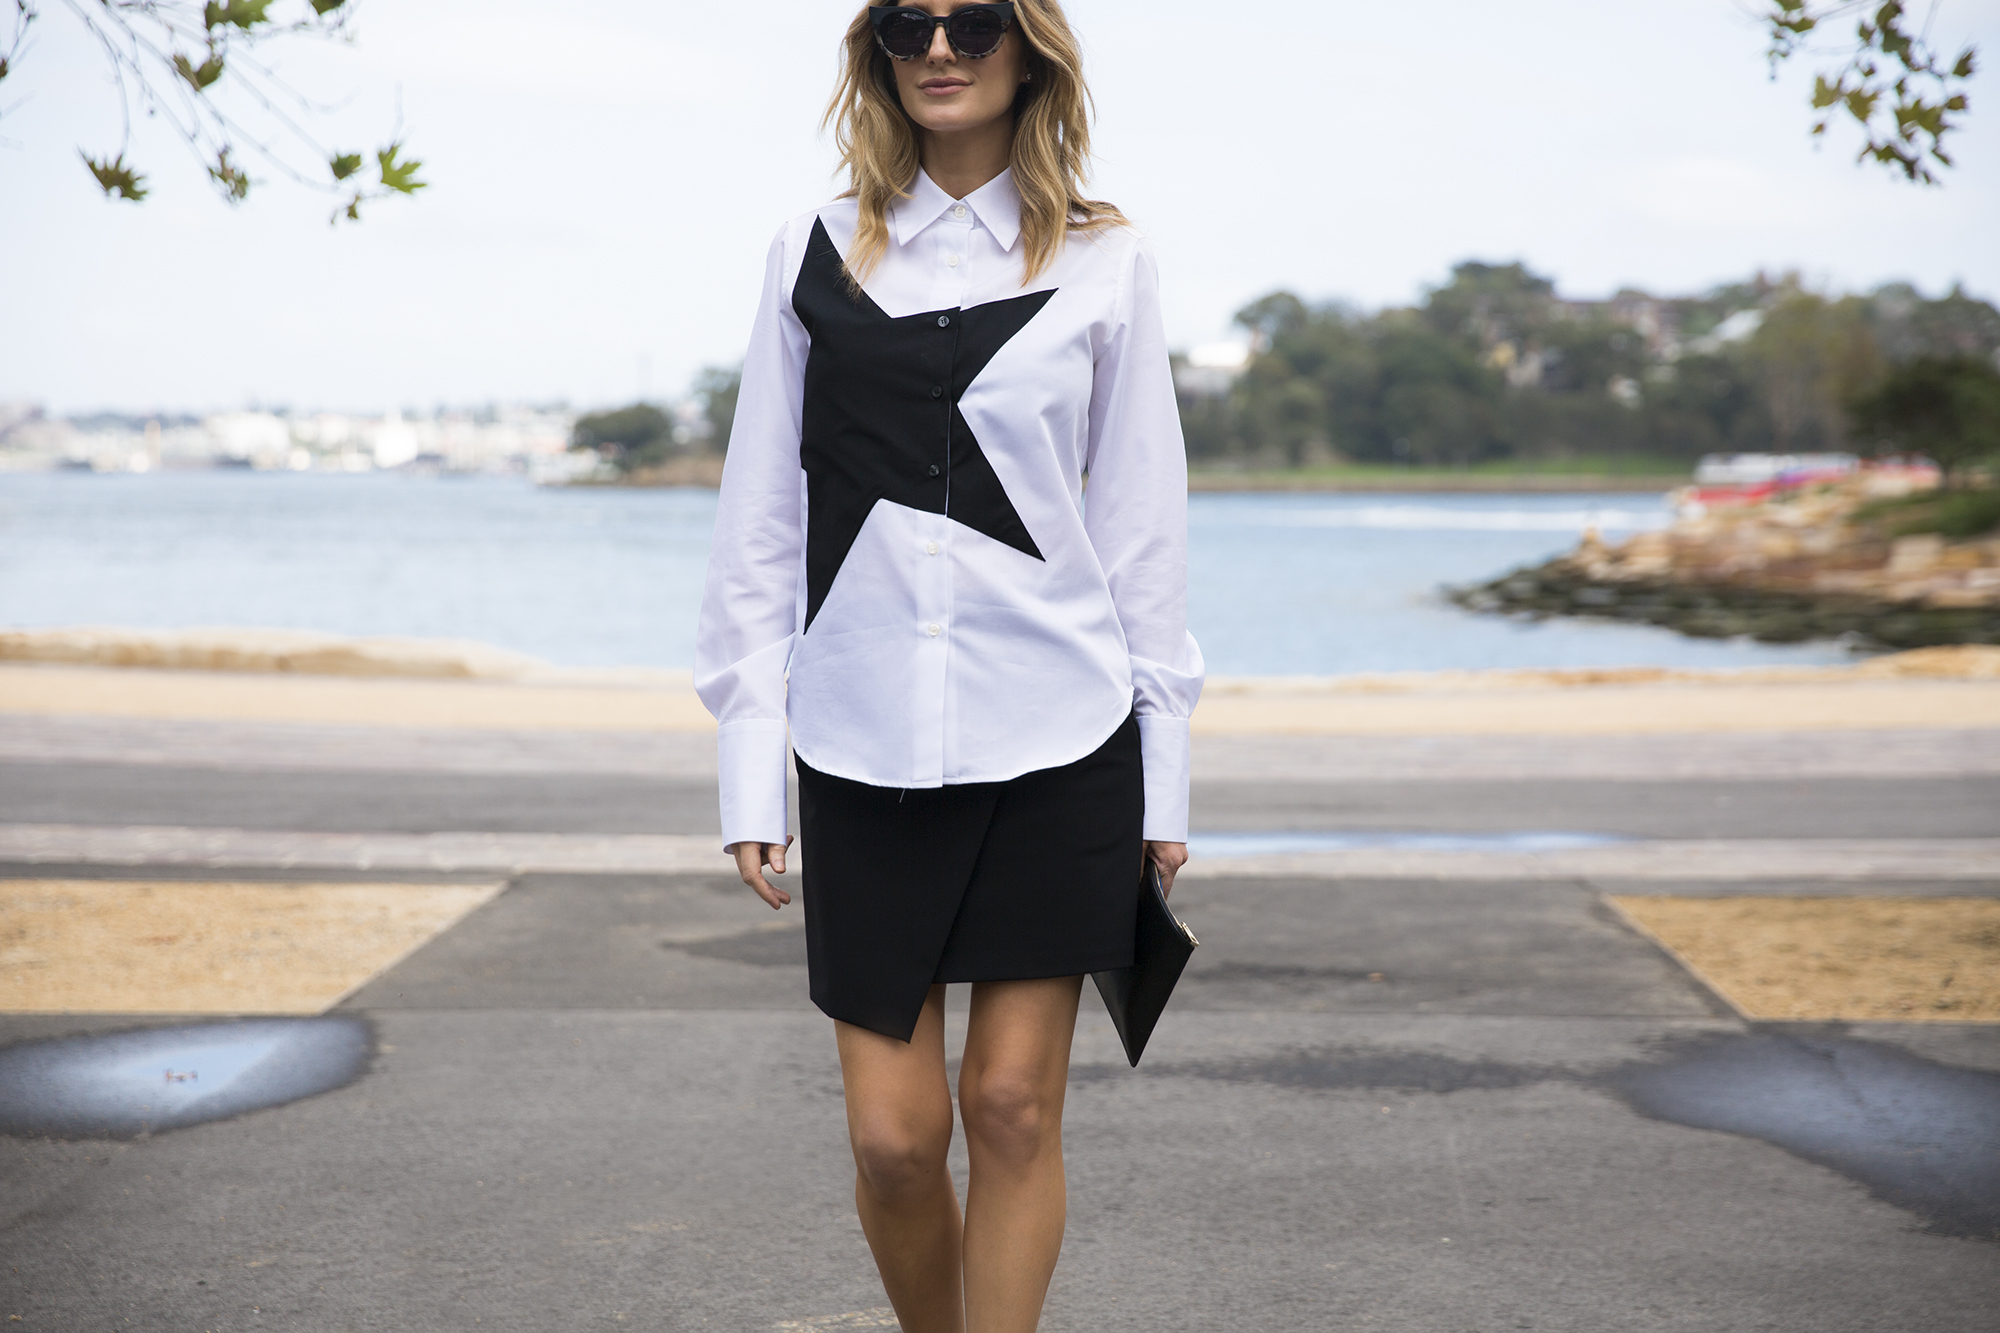 street style Archives - Page 7 of 32 - Kate Waterhouse